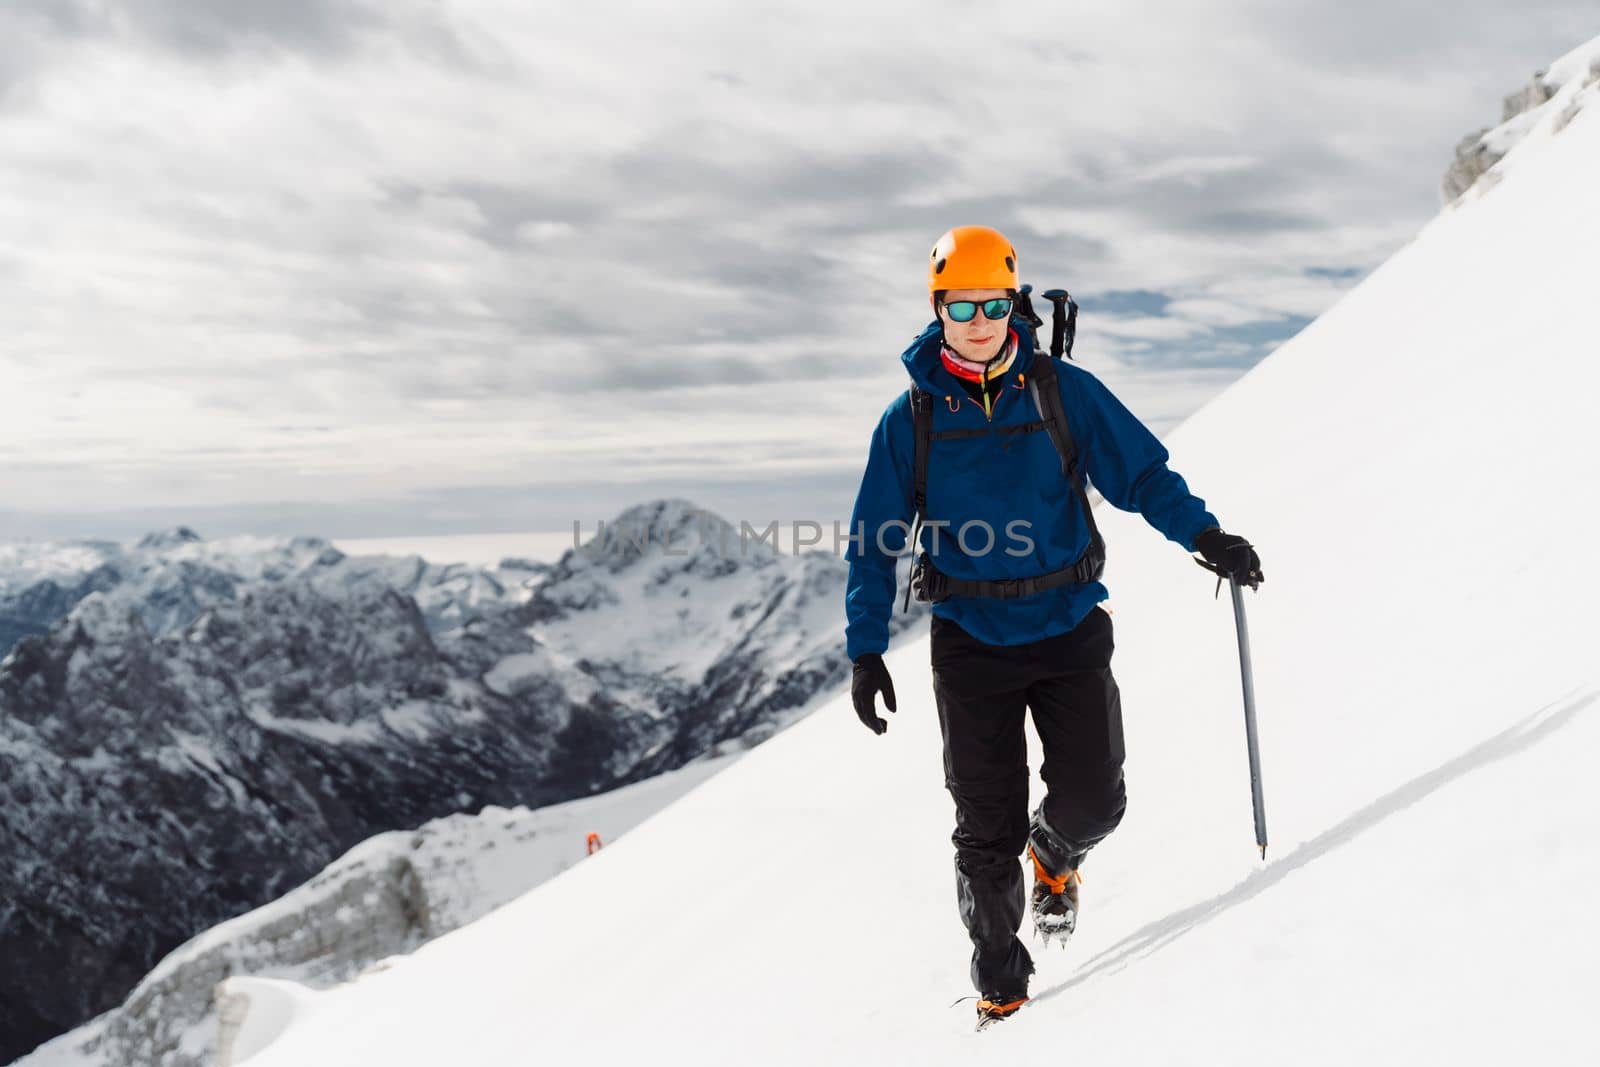 Portrait of a mountaineer with a protective helmet and sunglasses standing in snow, high up in the mountains by VisualProductions